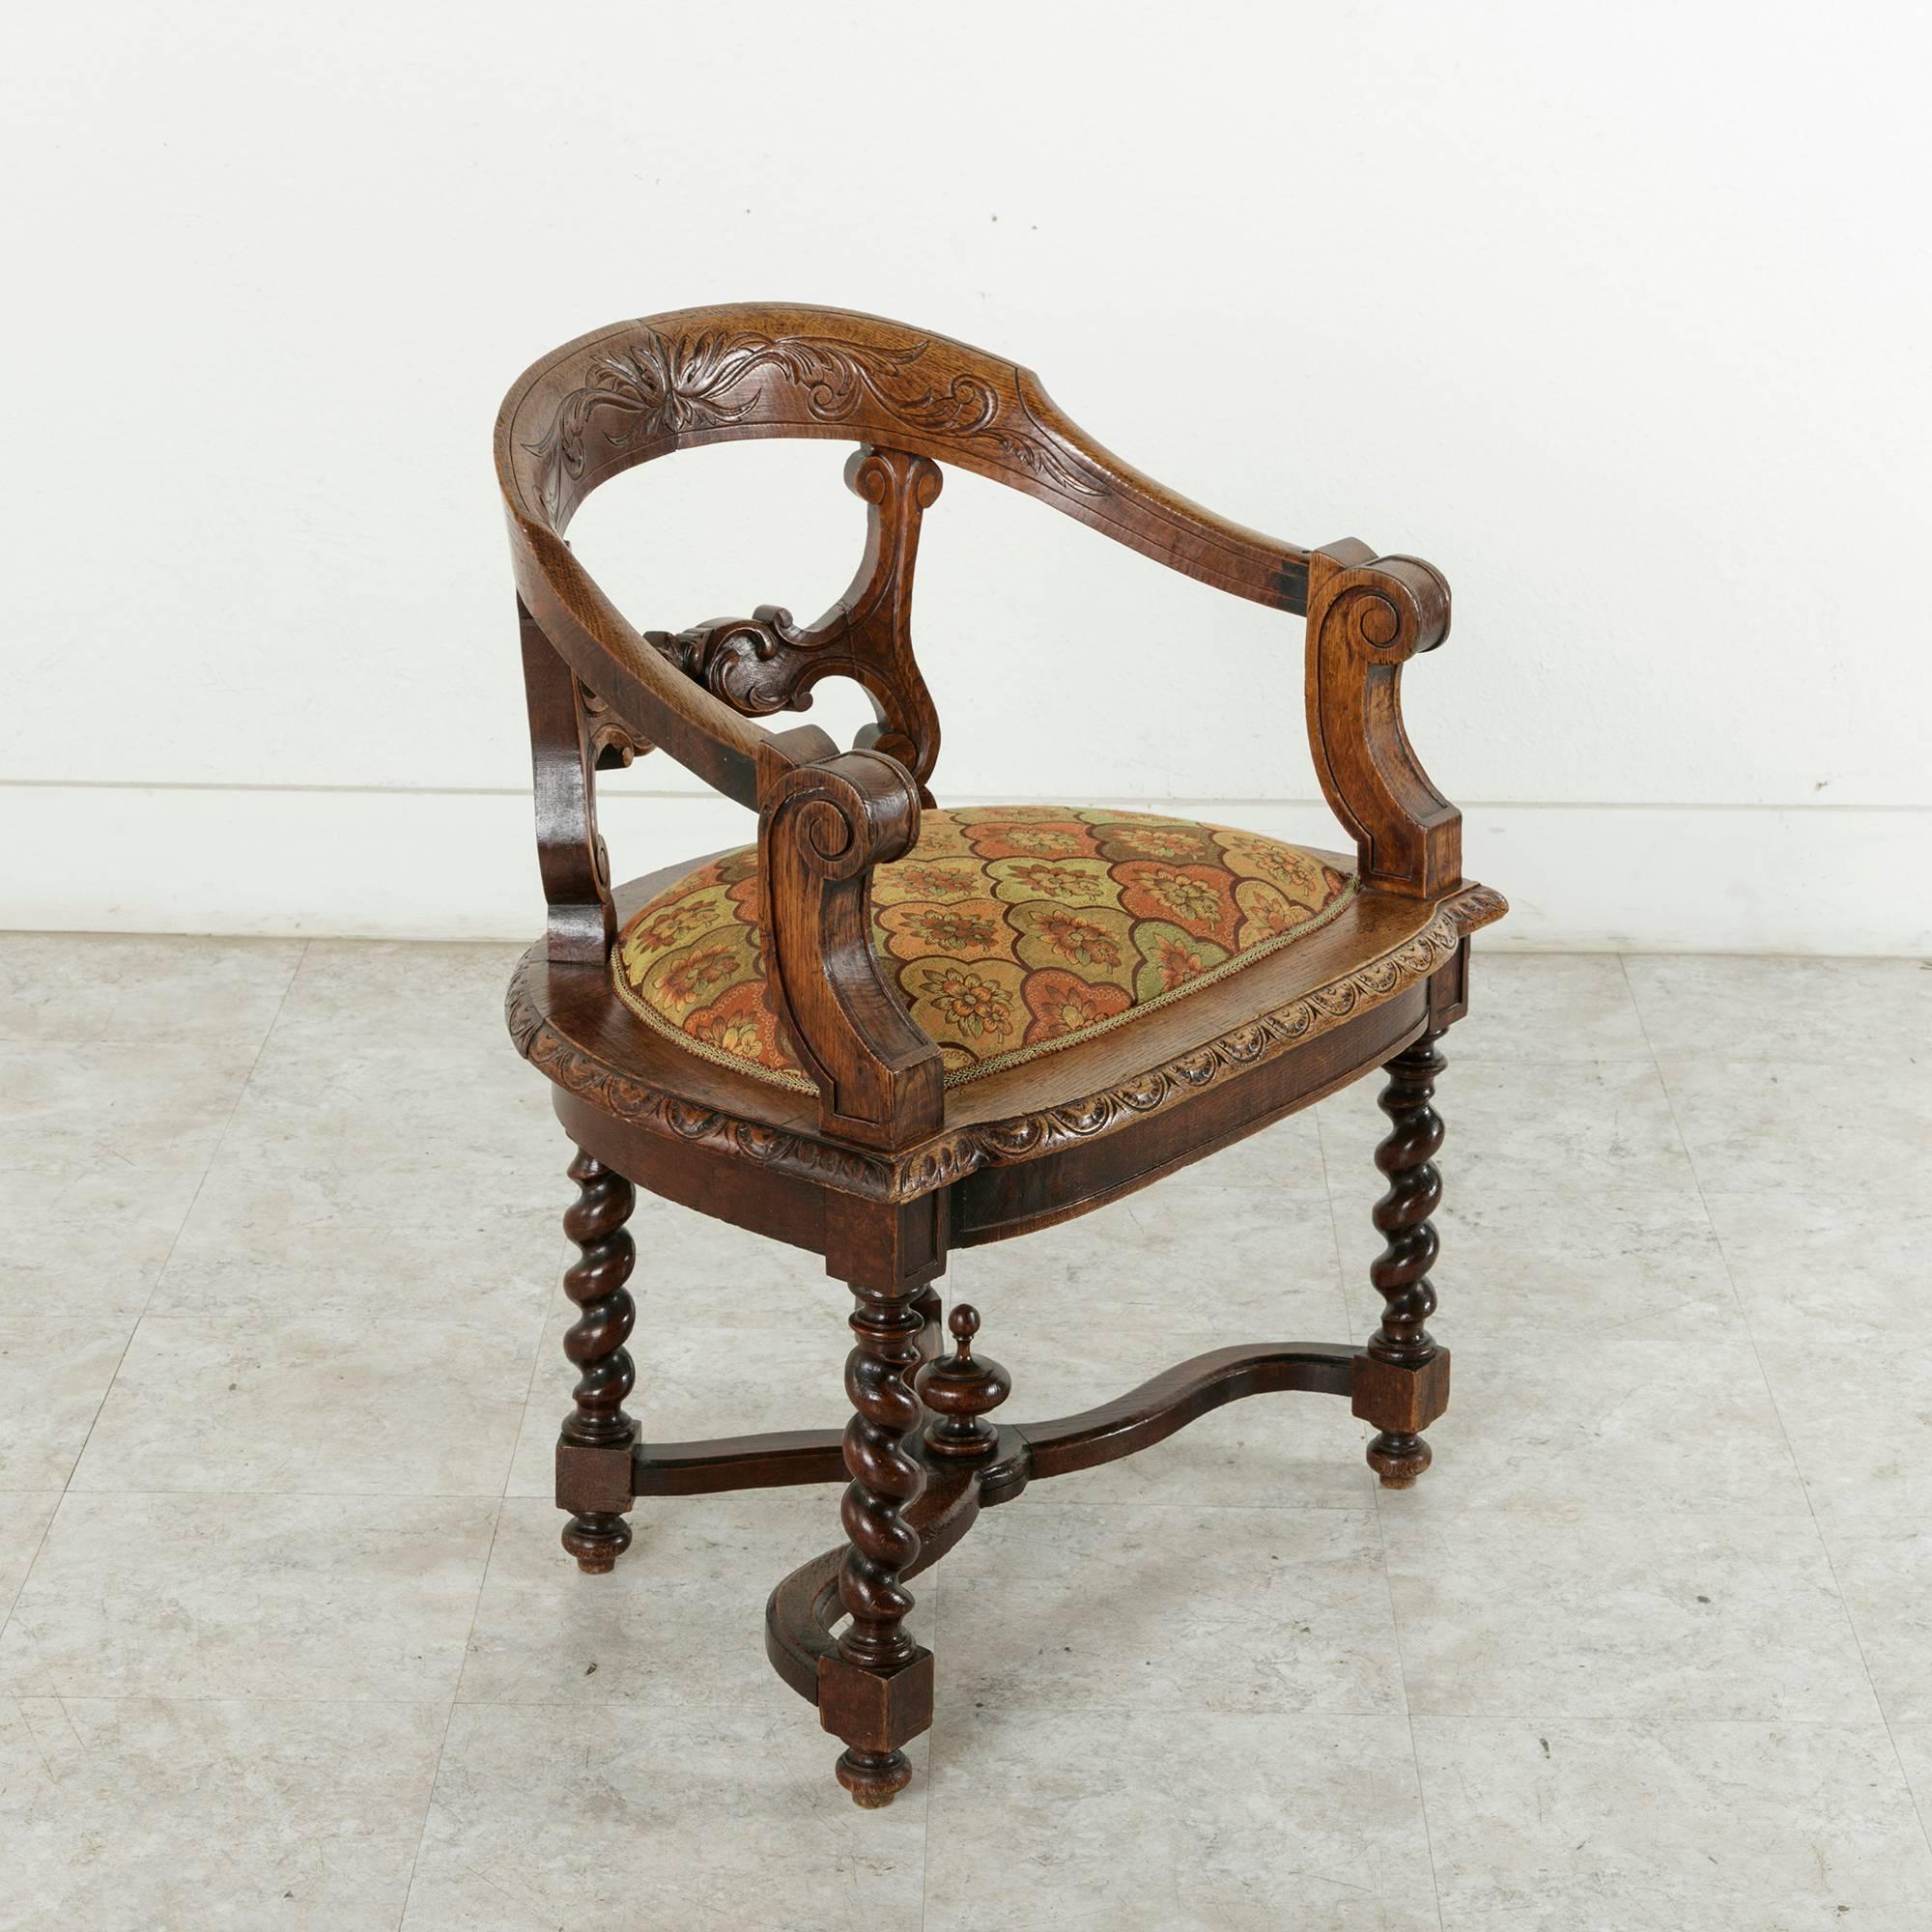 This hand-carved French oak armchair in the Renaissance style of Henri II features barley twist legs joined by an X-stretcher capped with a central finial. Its ample 27-inch wide seat is detailed with carving all around, and its low arms were